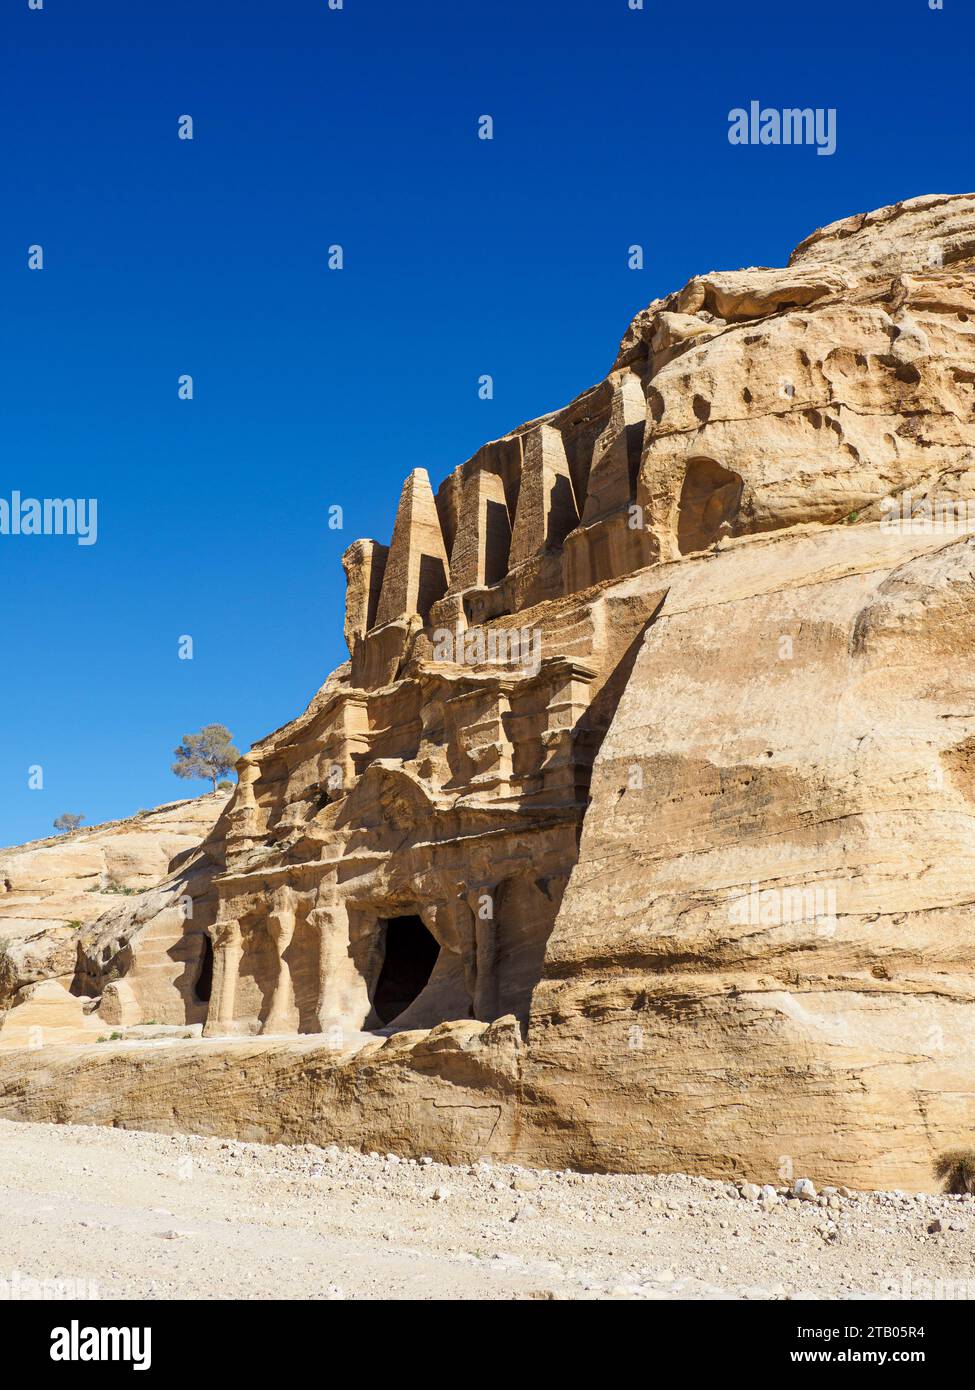 The Obelisk Tomb, Petra Archaeological Park, a UNESCO World Heritage Site, 7 New Wonders of the World, Jordan. Stock Photo